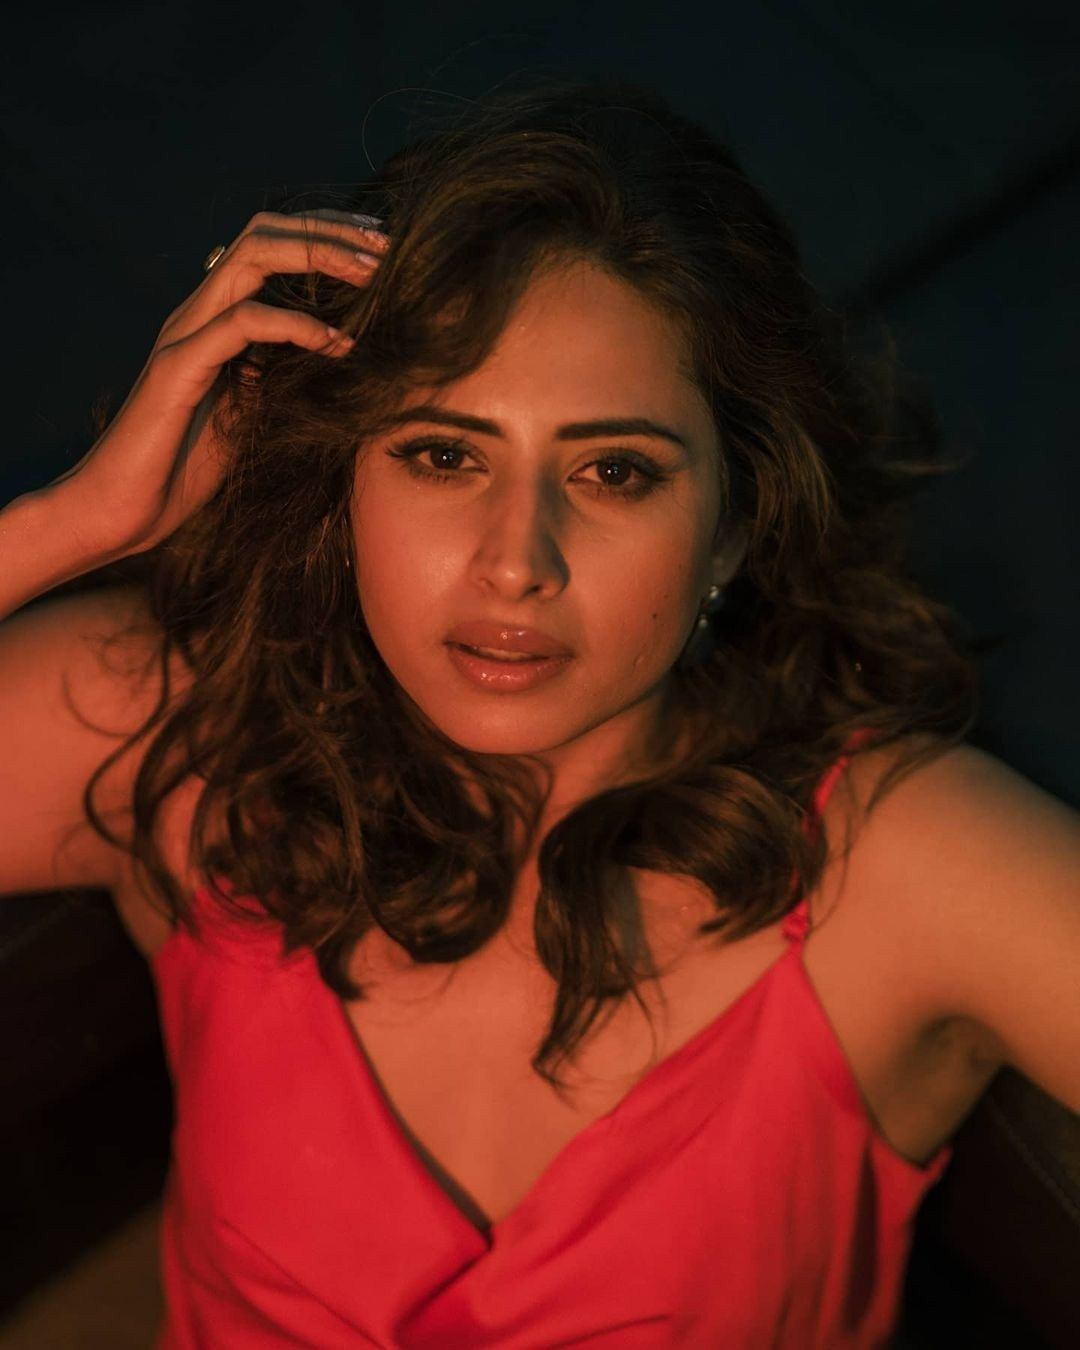 Actress sargun mehta captivating images-Actresssargun, Sargun Mehta, Sargunmehta, Teluguactress Photos,Spicy Hot Pics,Images,High Resolution WallPapers Download